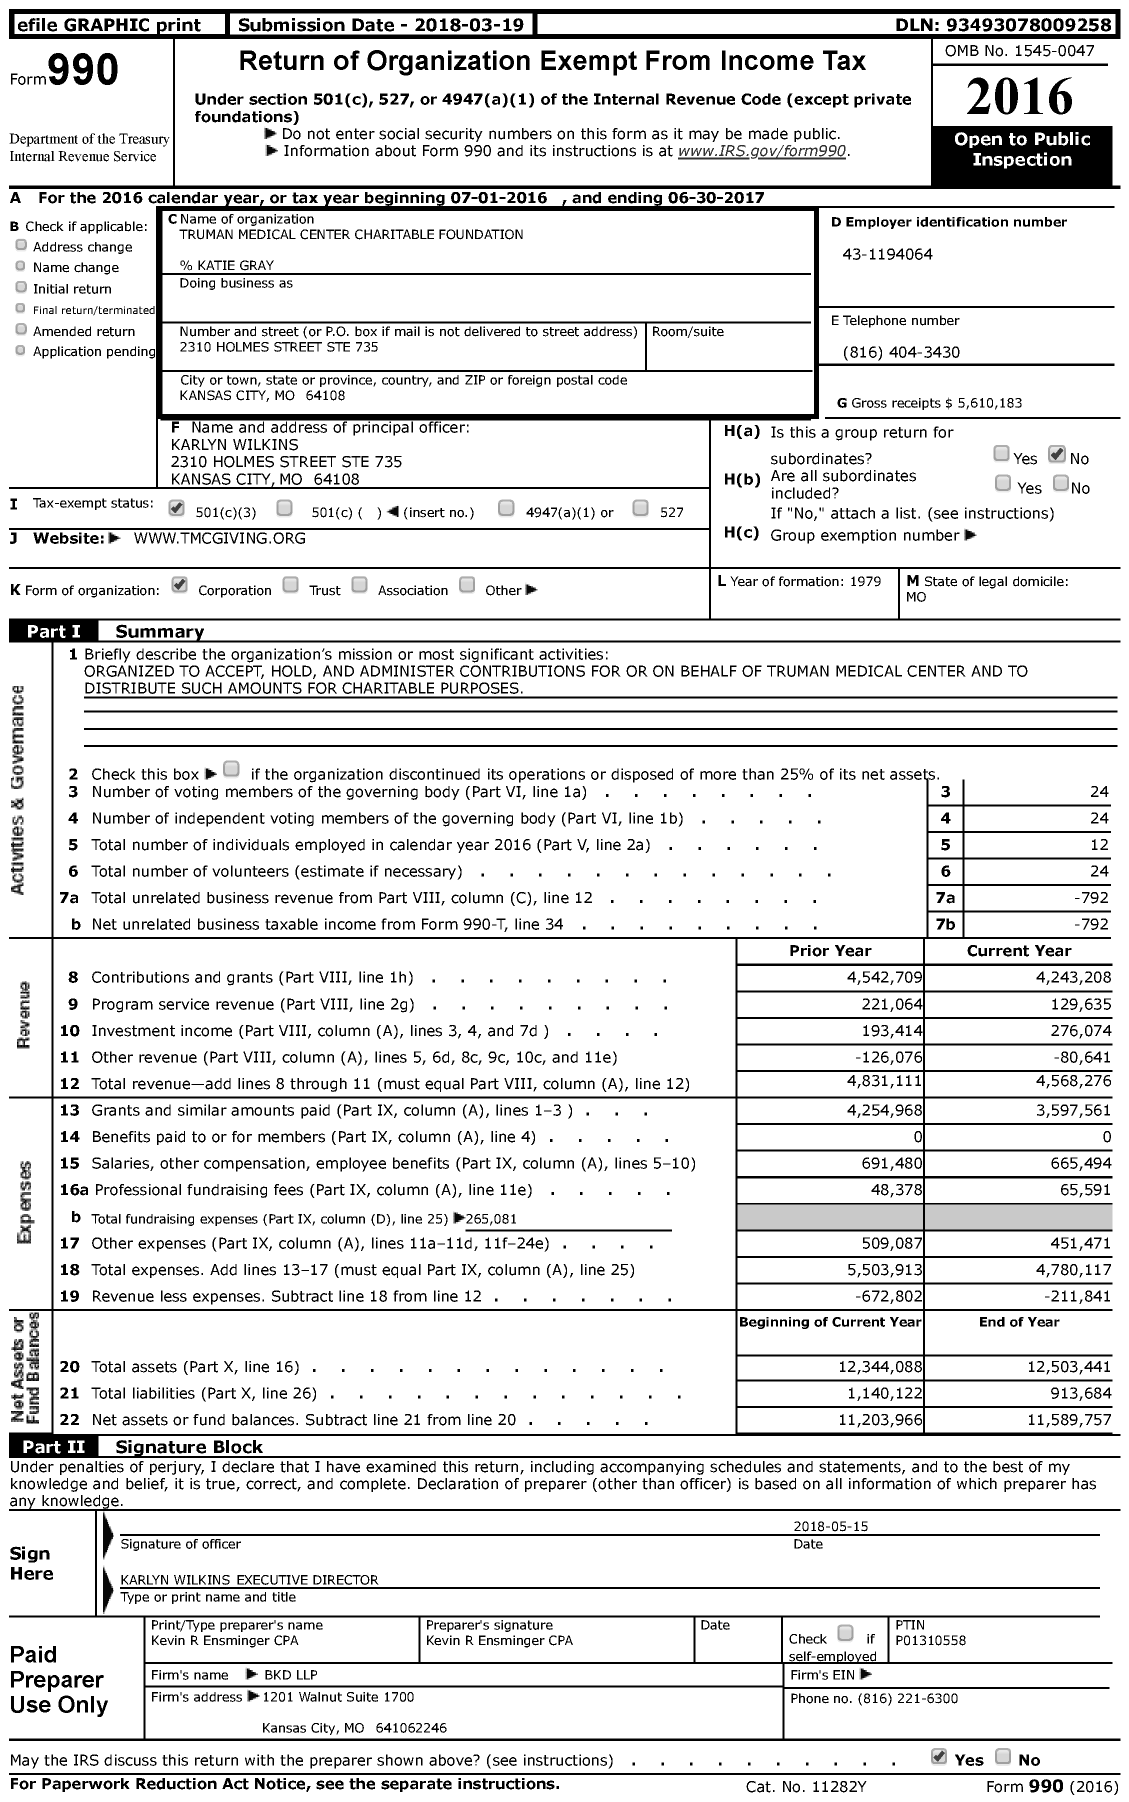 Image of first page of 2016 Form 990 for University Health Foundation / Truman Medical Center Charitable Foundation (TMC)